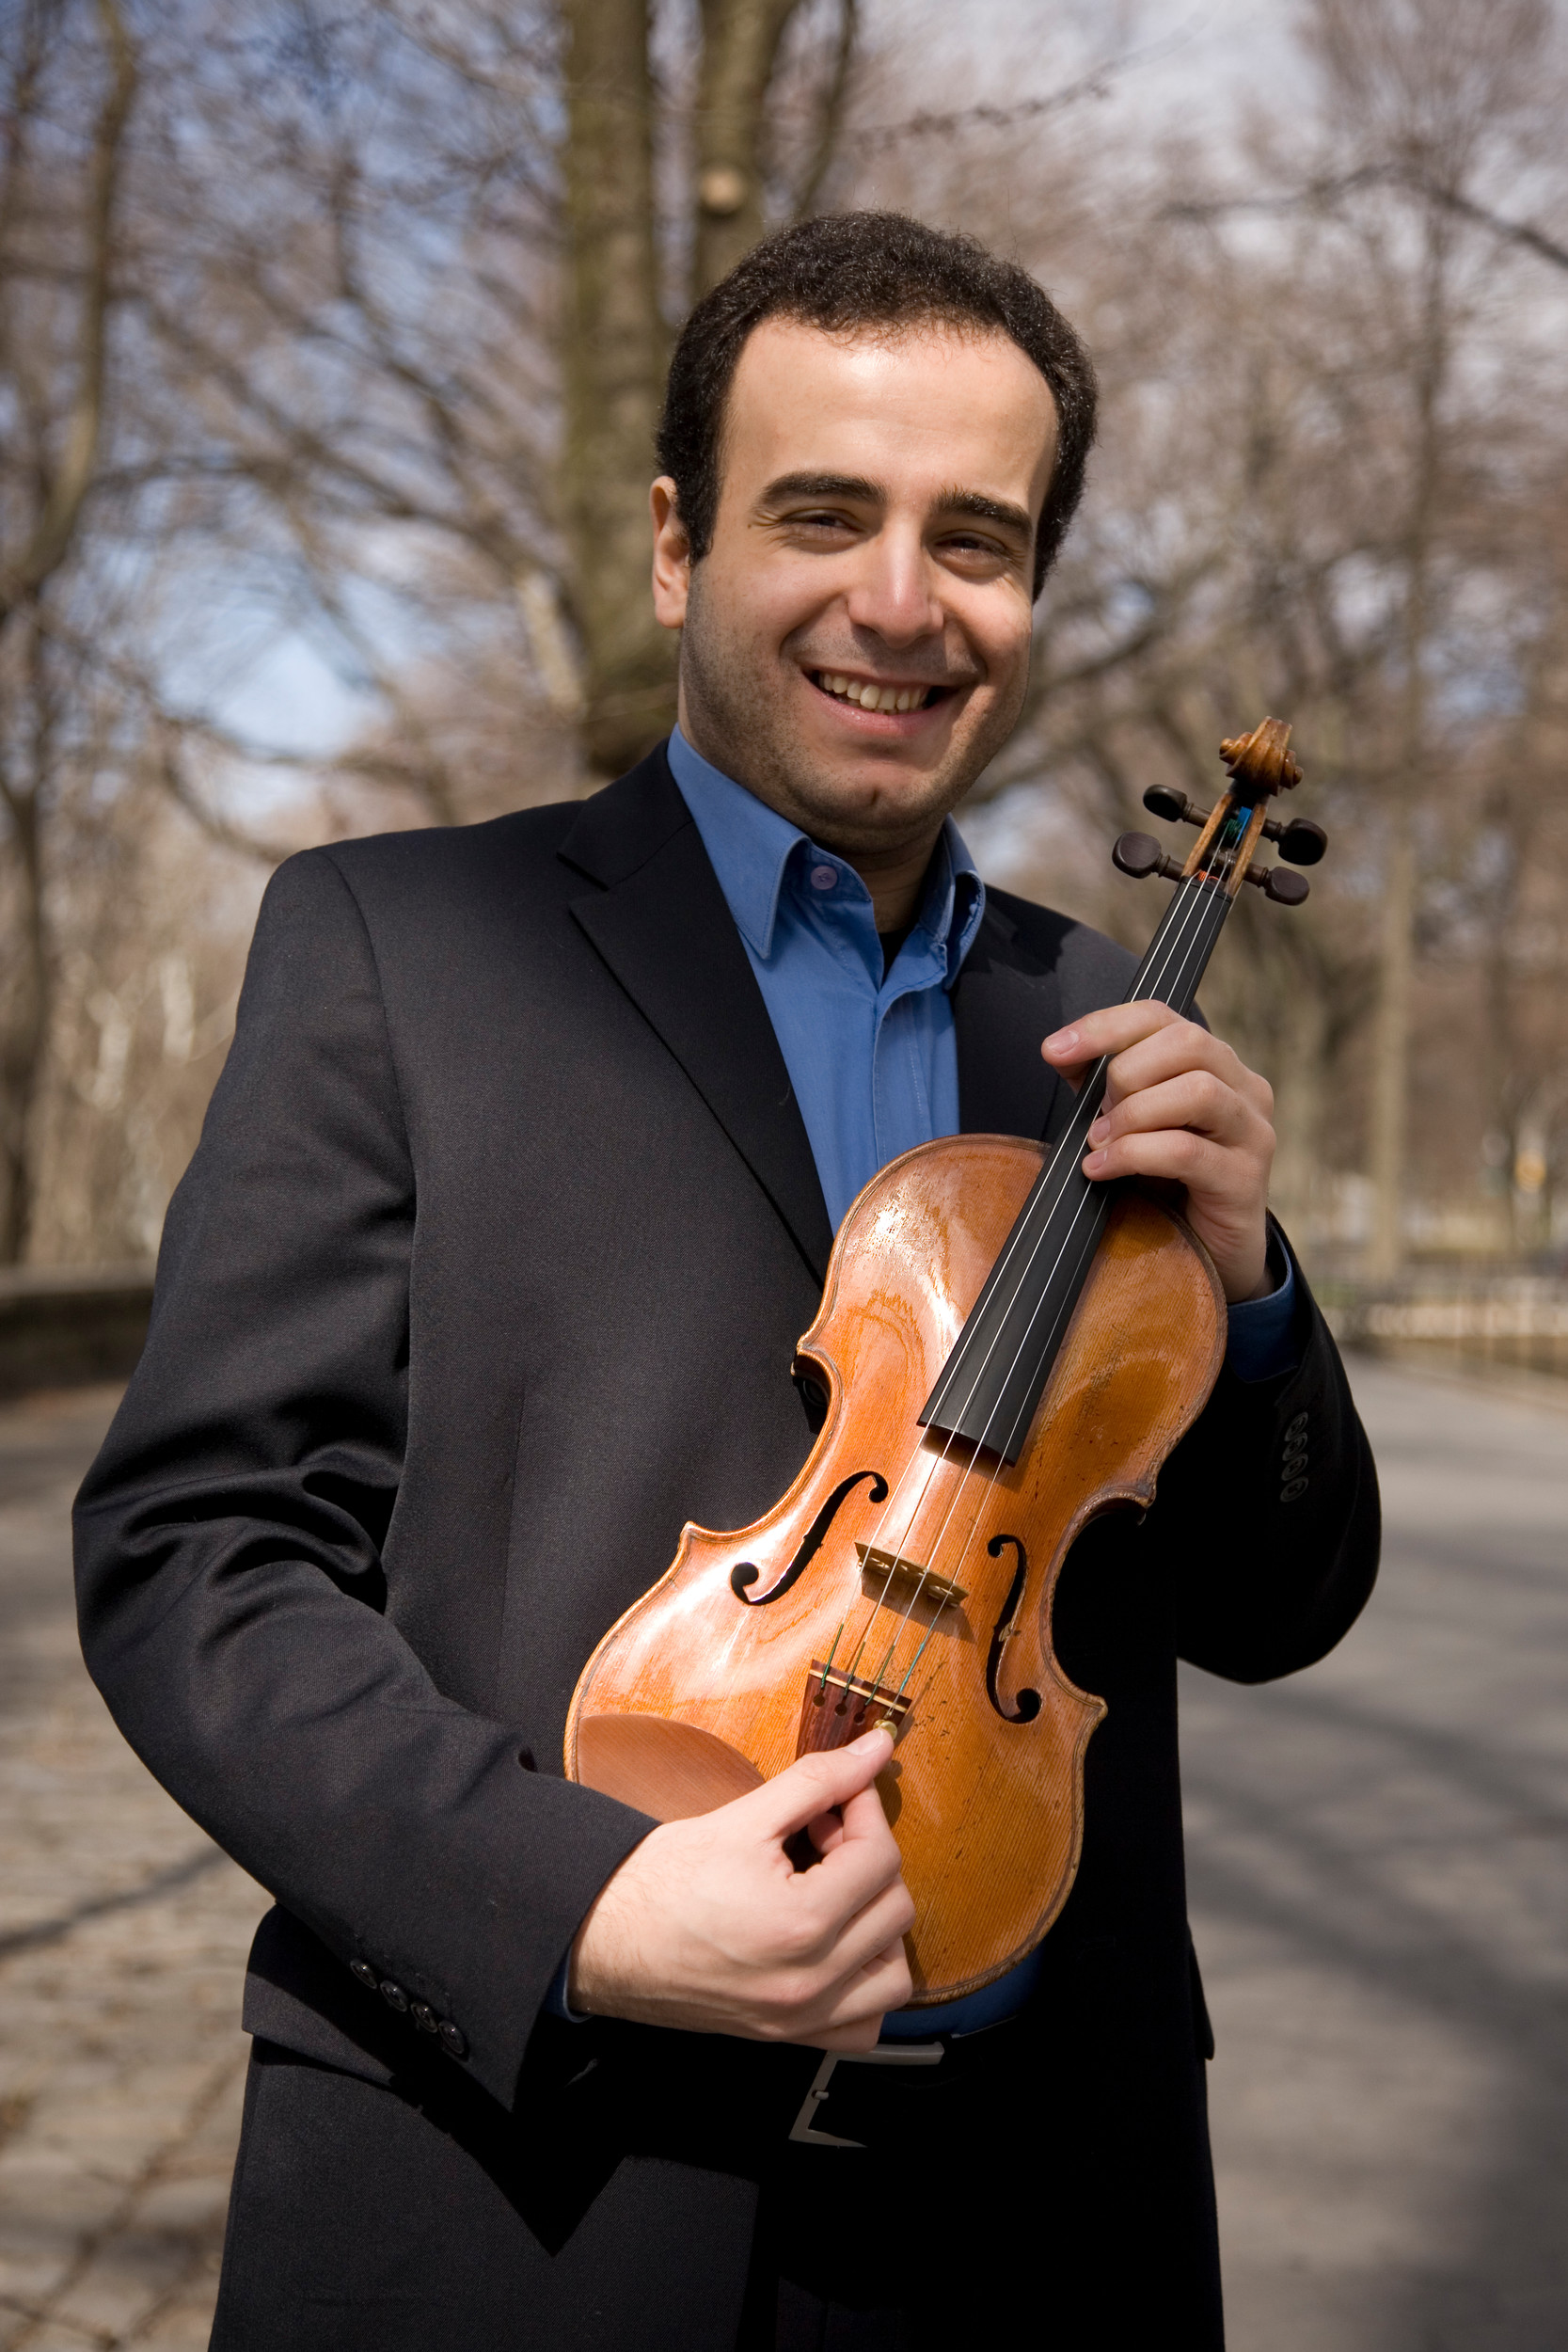 Acclaimed violinist Bela Horvath appears at Old Westbury Gardens historic Westbury House, participating a dynamic program of chamber masterworks.